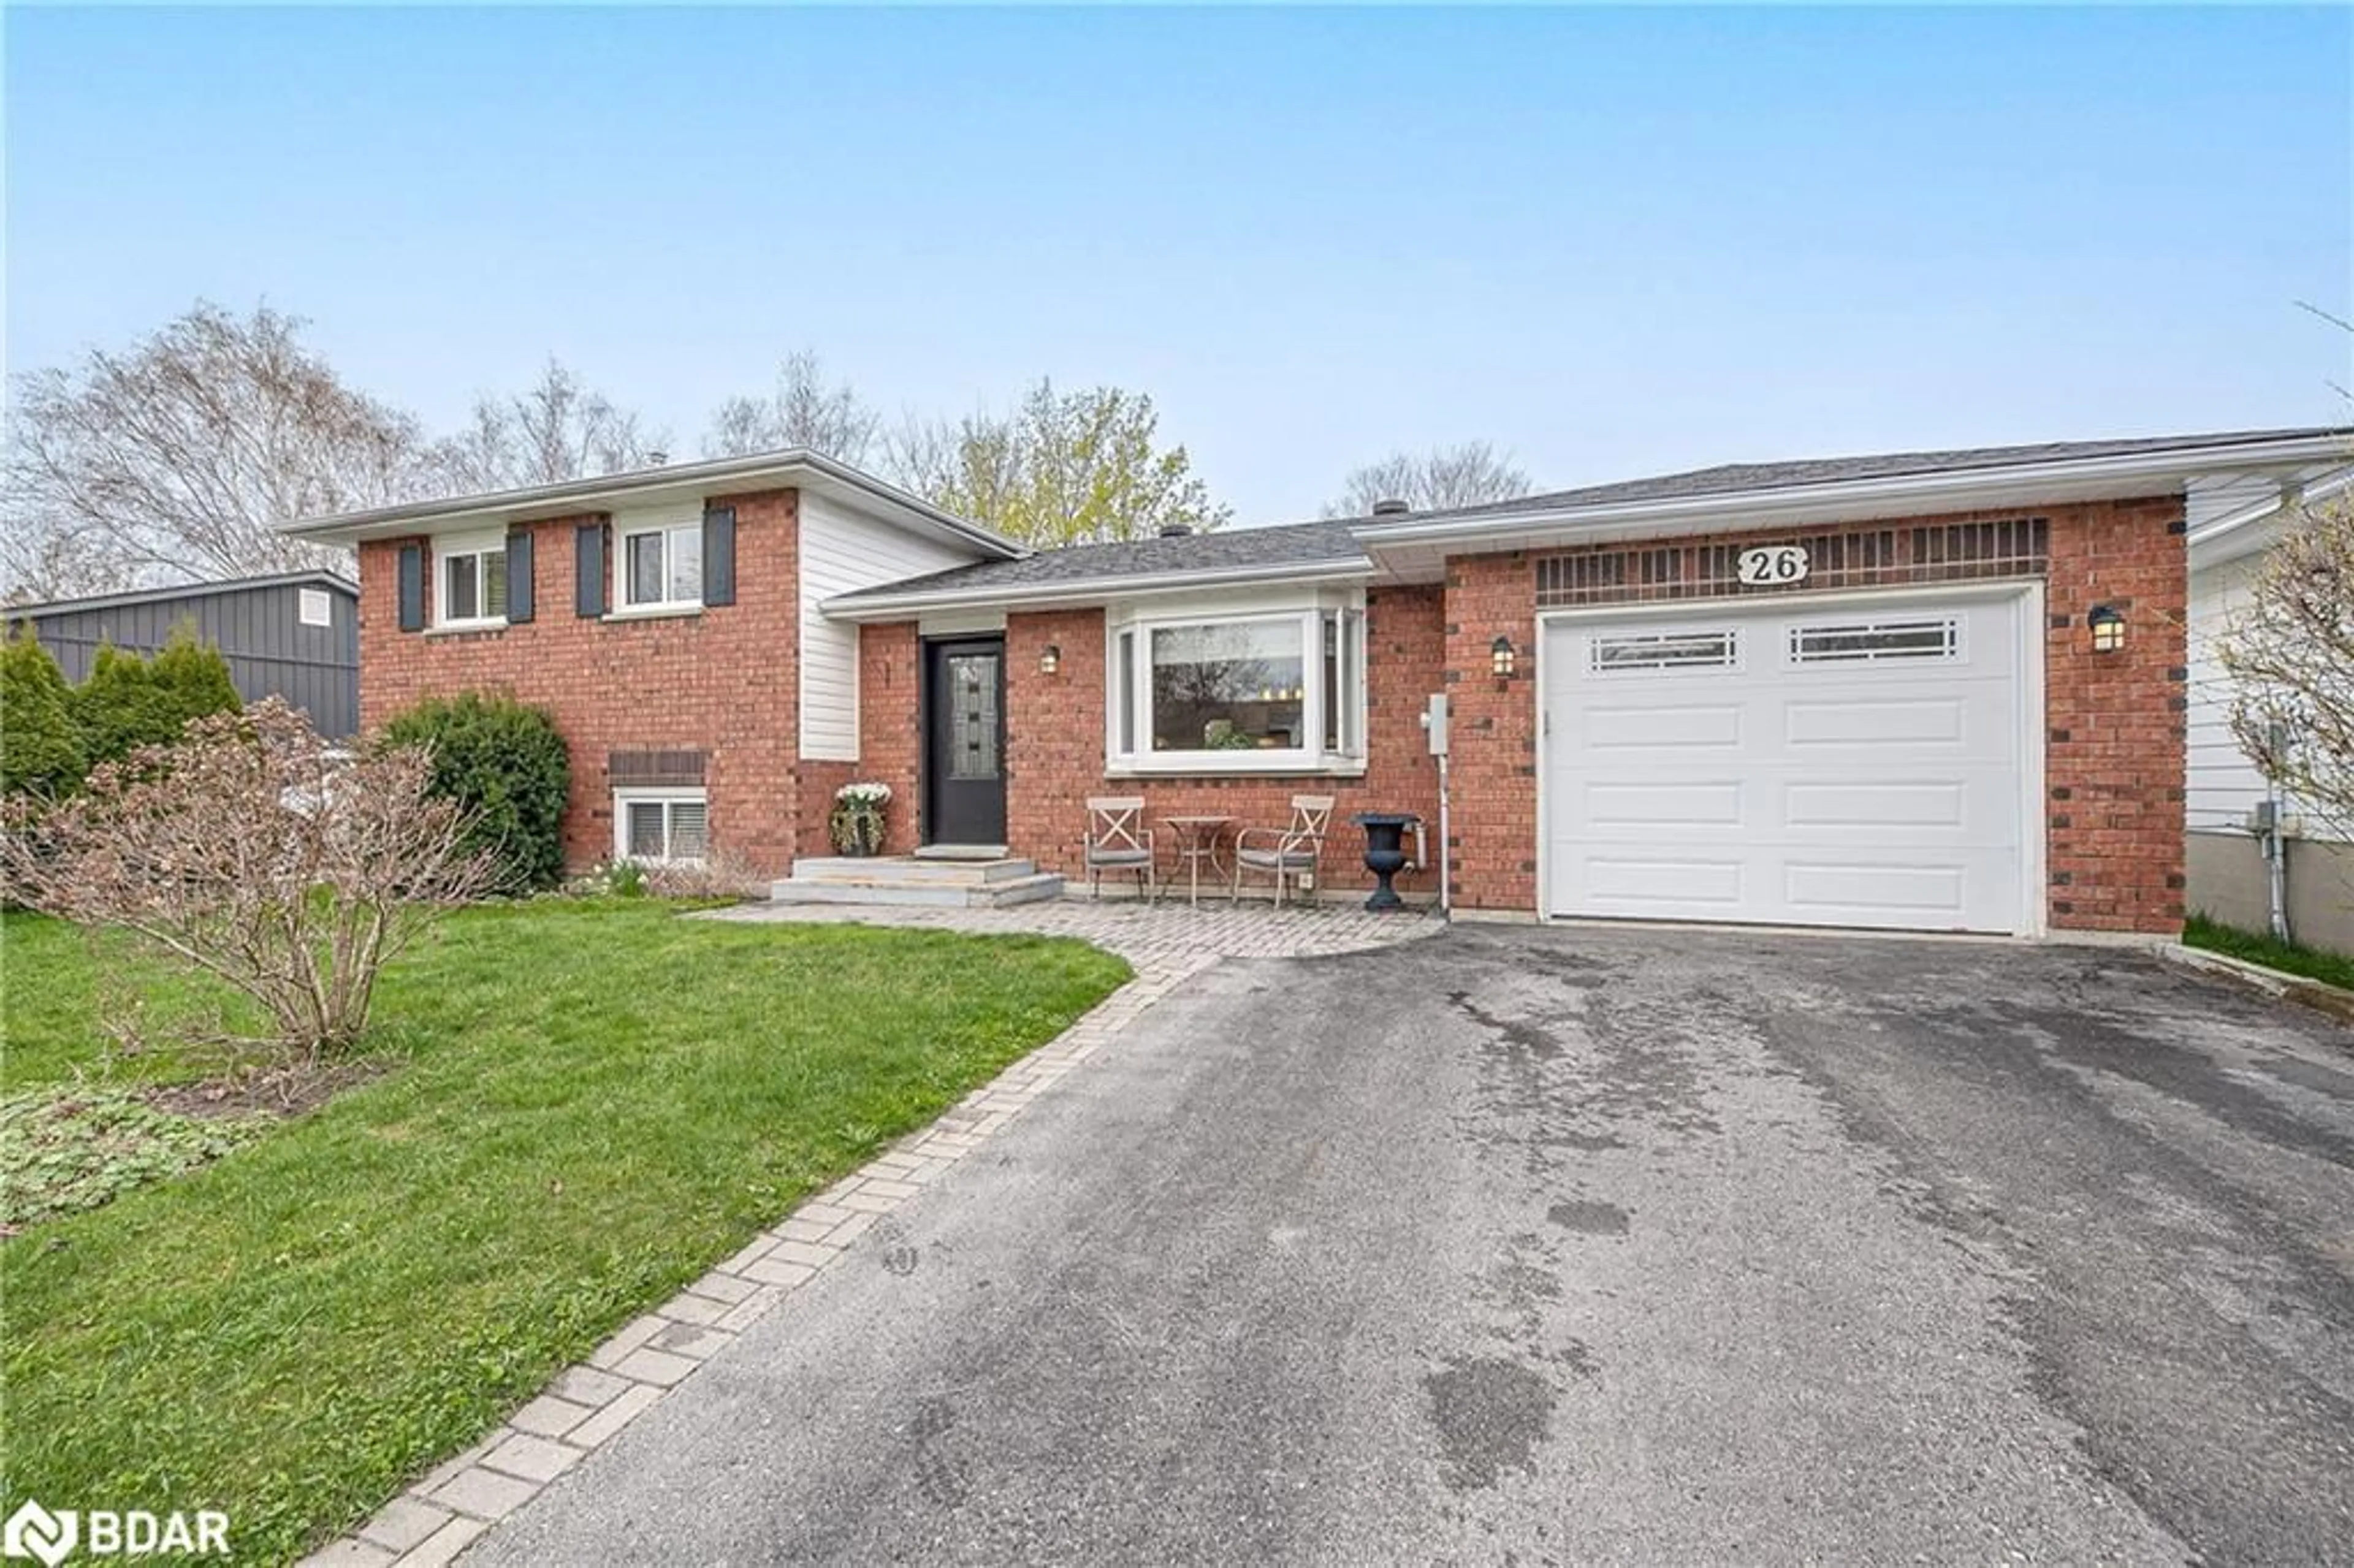 Home with brick exterior material for 26 Centennial Ave, Elmvale Ontario L0L 1P0